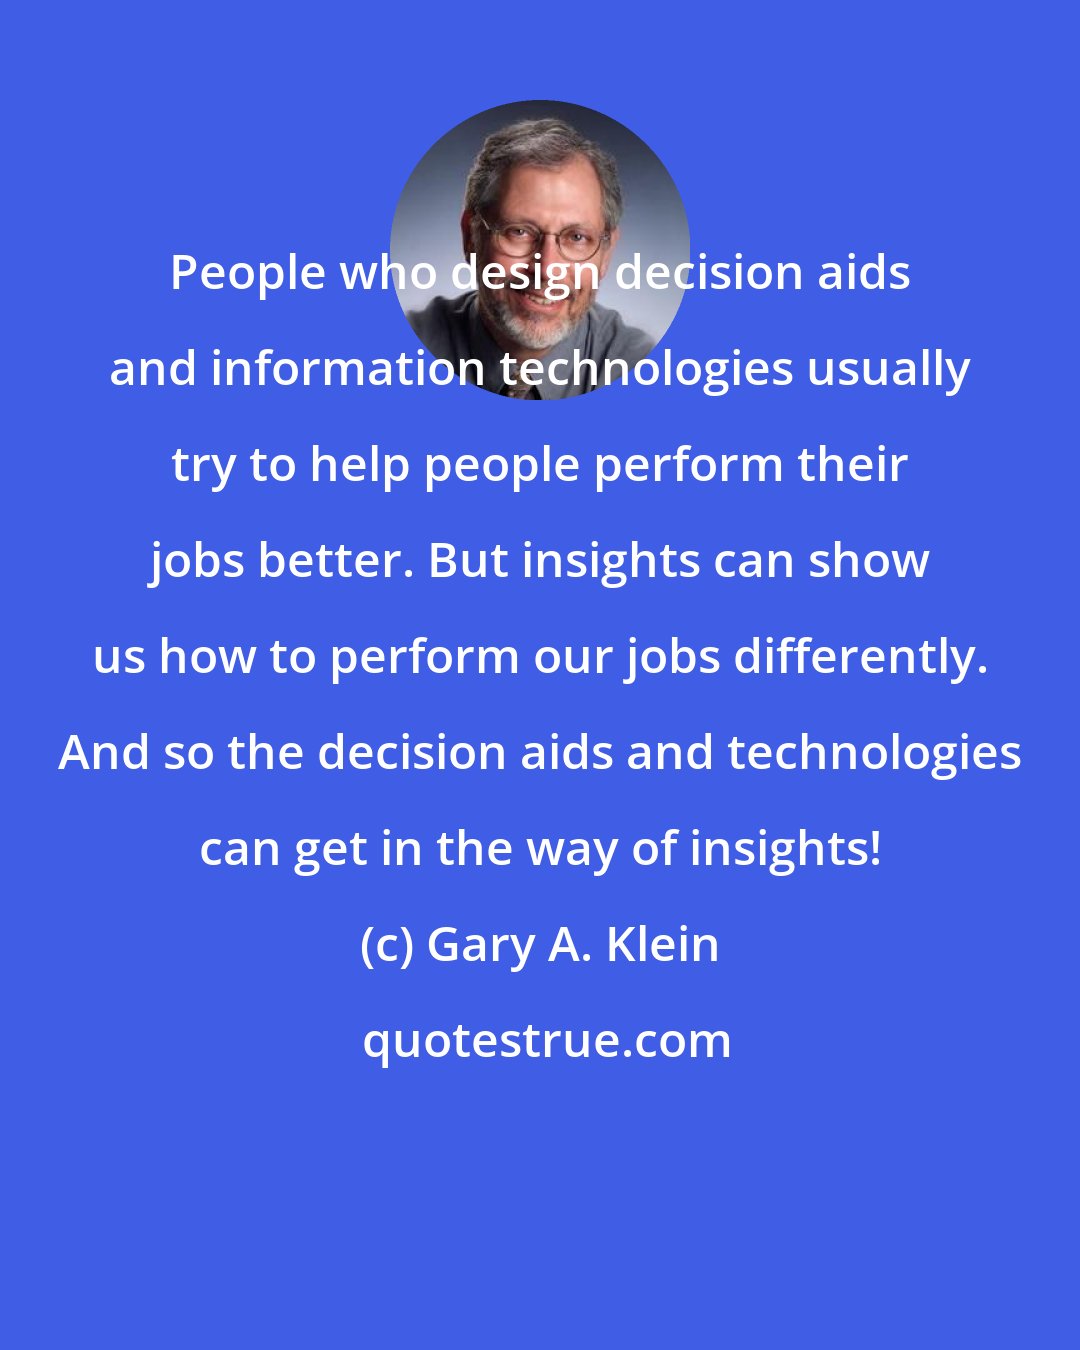 Gary A. Klein: People who design decision aids and information technologies usually try to help people perform their jobs better. But insights can show us how to perform our jobs differently. And so the decision aids and technologies can get in the way of insights!